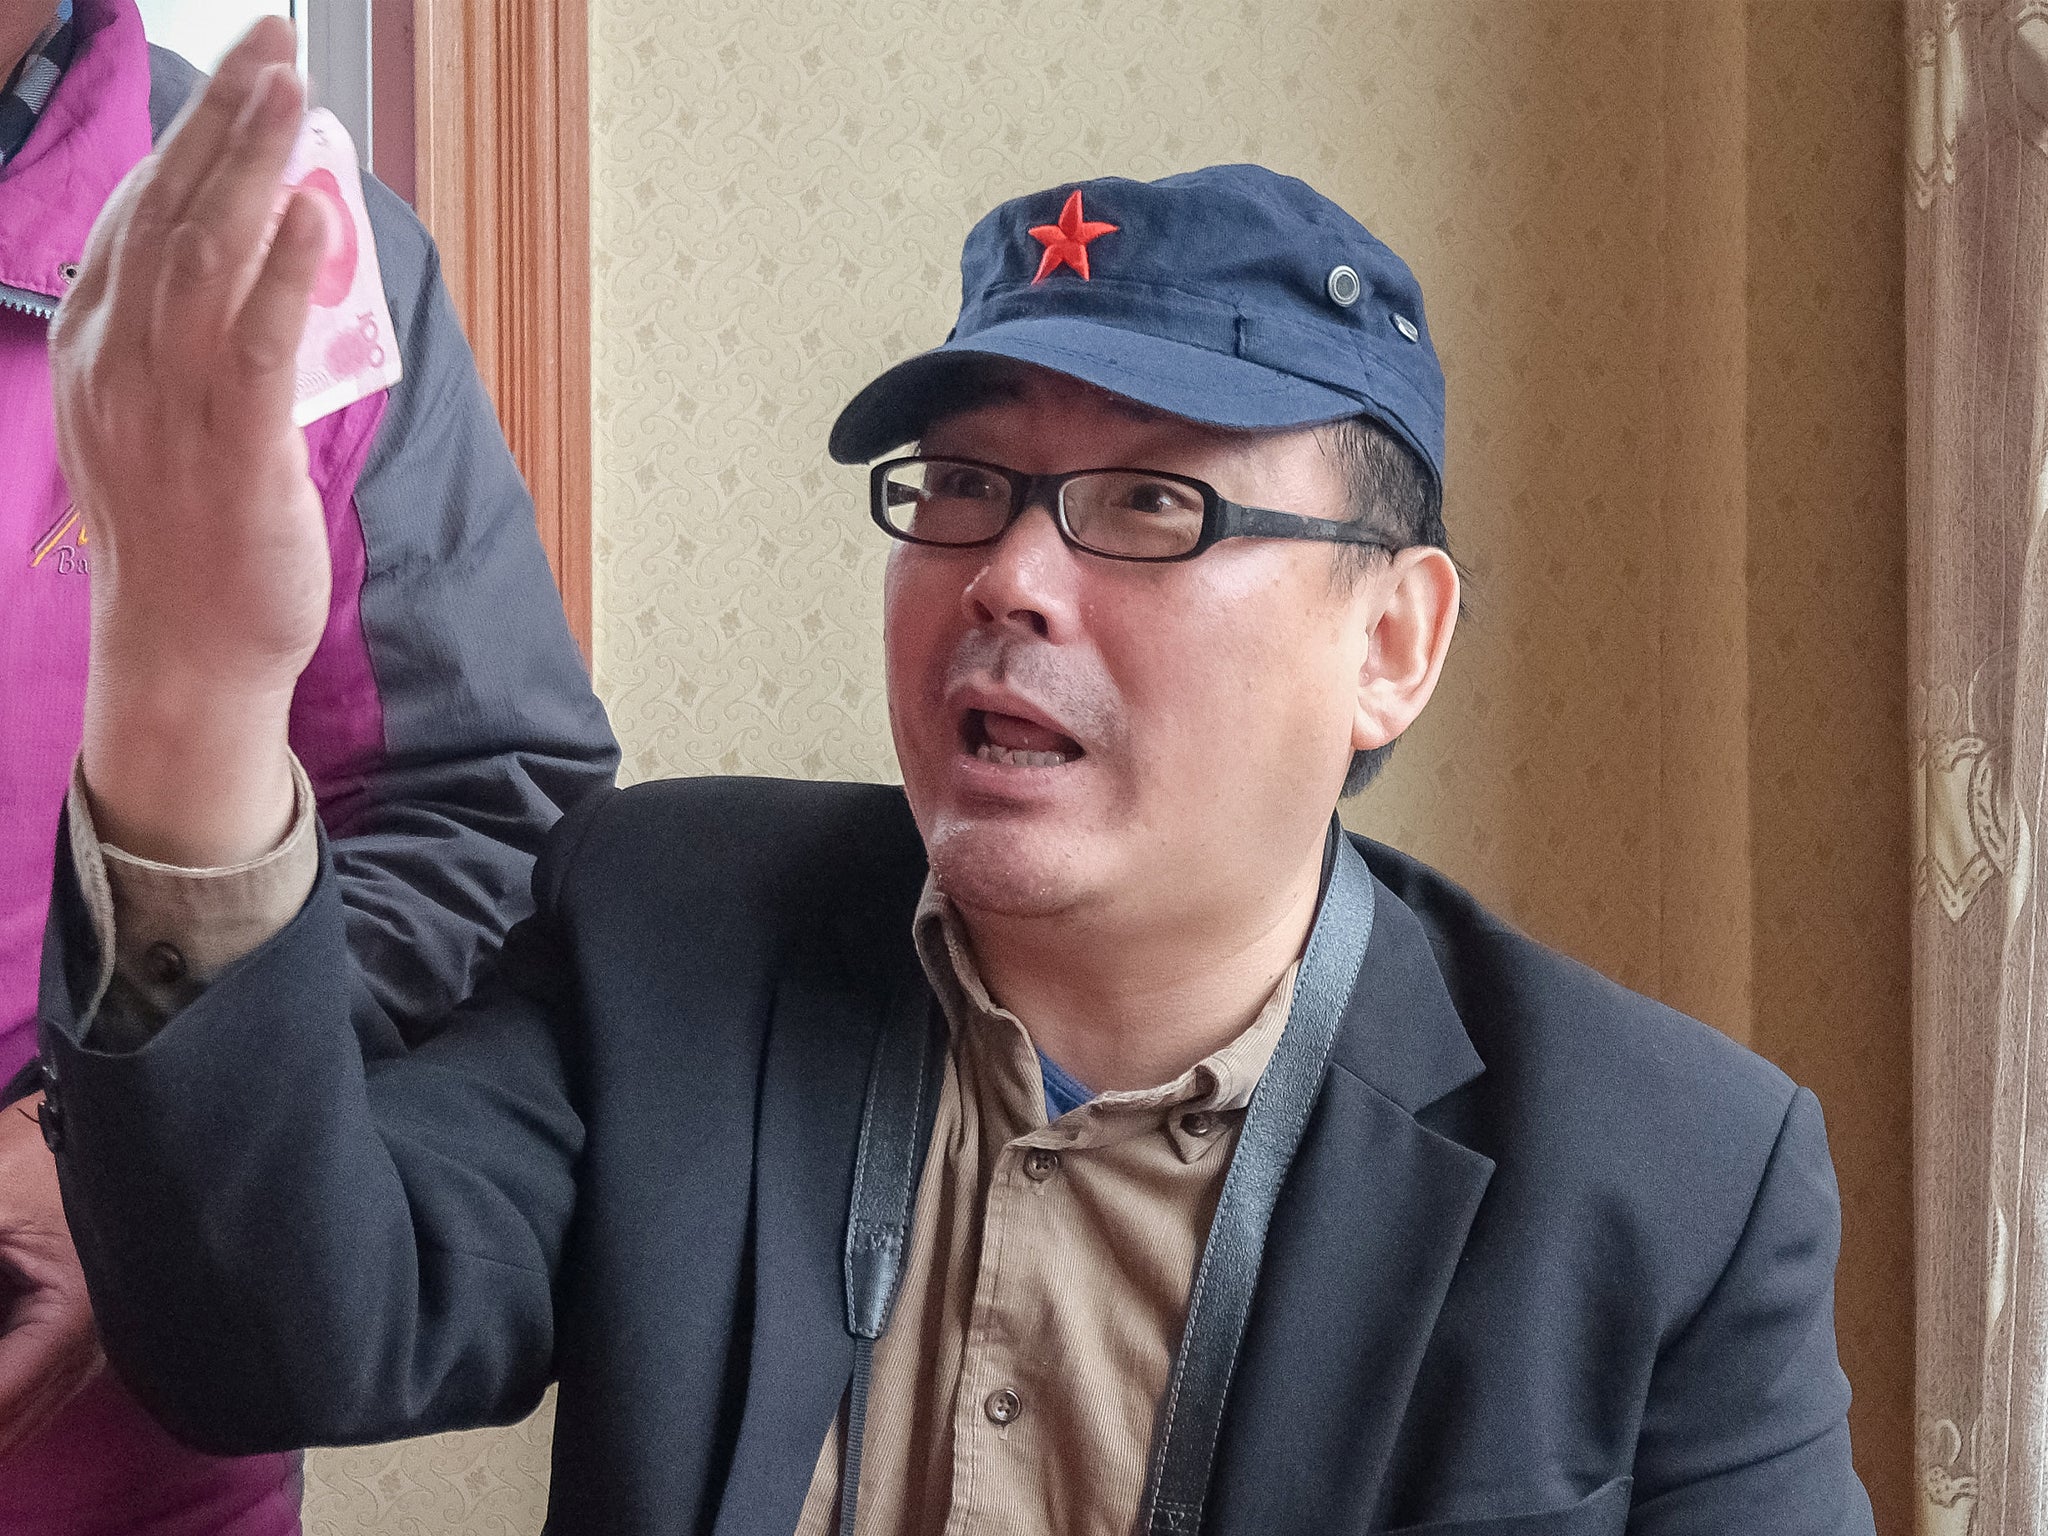 Yang Hengjun, author and former Chinese diplomat, who is now an Australian citizen, in 2014 prior to his arrest